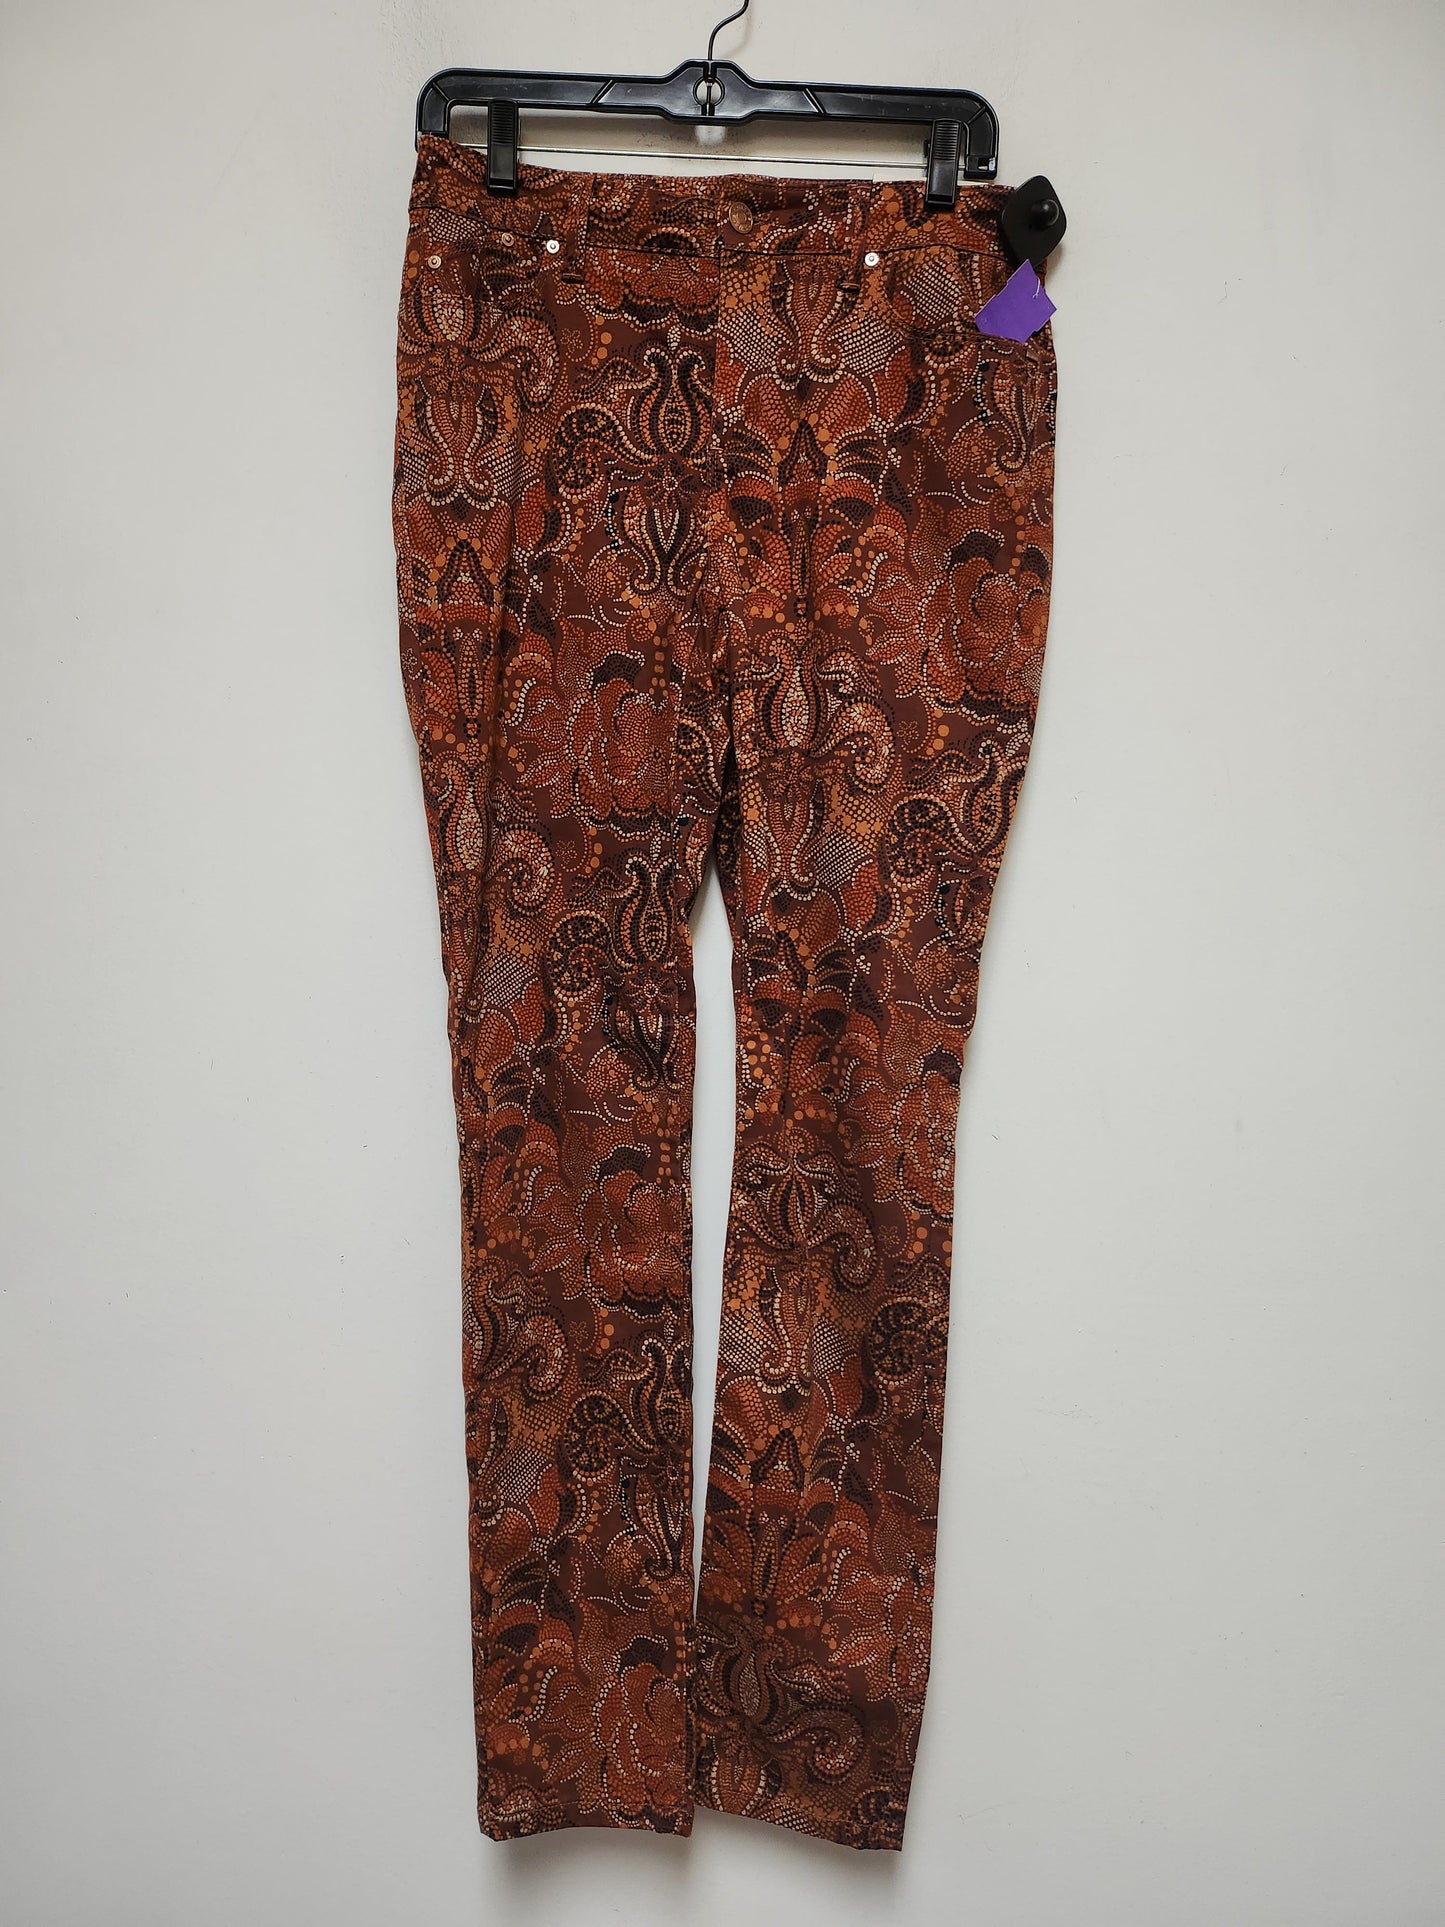 Multi-colored Jeans Jeggings Chicos, Size 4